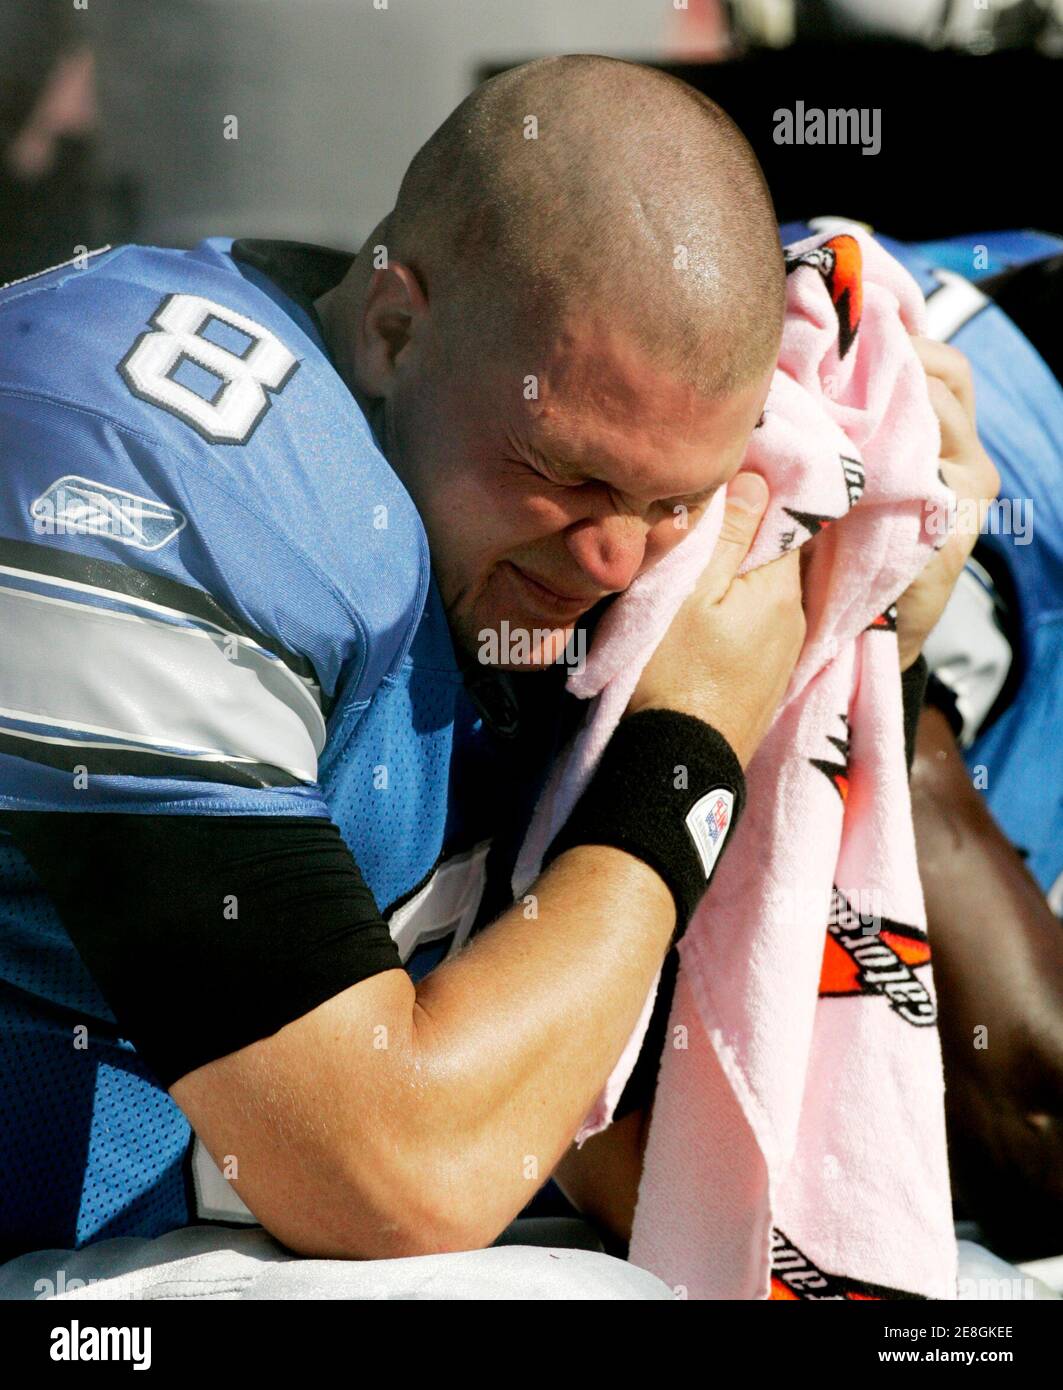 Detroit Lions quarterback Jon Kitna grimaces on the team bench in the second half against the Washington Redskins in their NFL football game in Landover, Maryland October 7, 2007. REUTERS/Gary Cameron  (UNITED STATES) Stock Photo